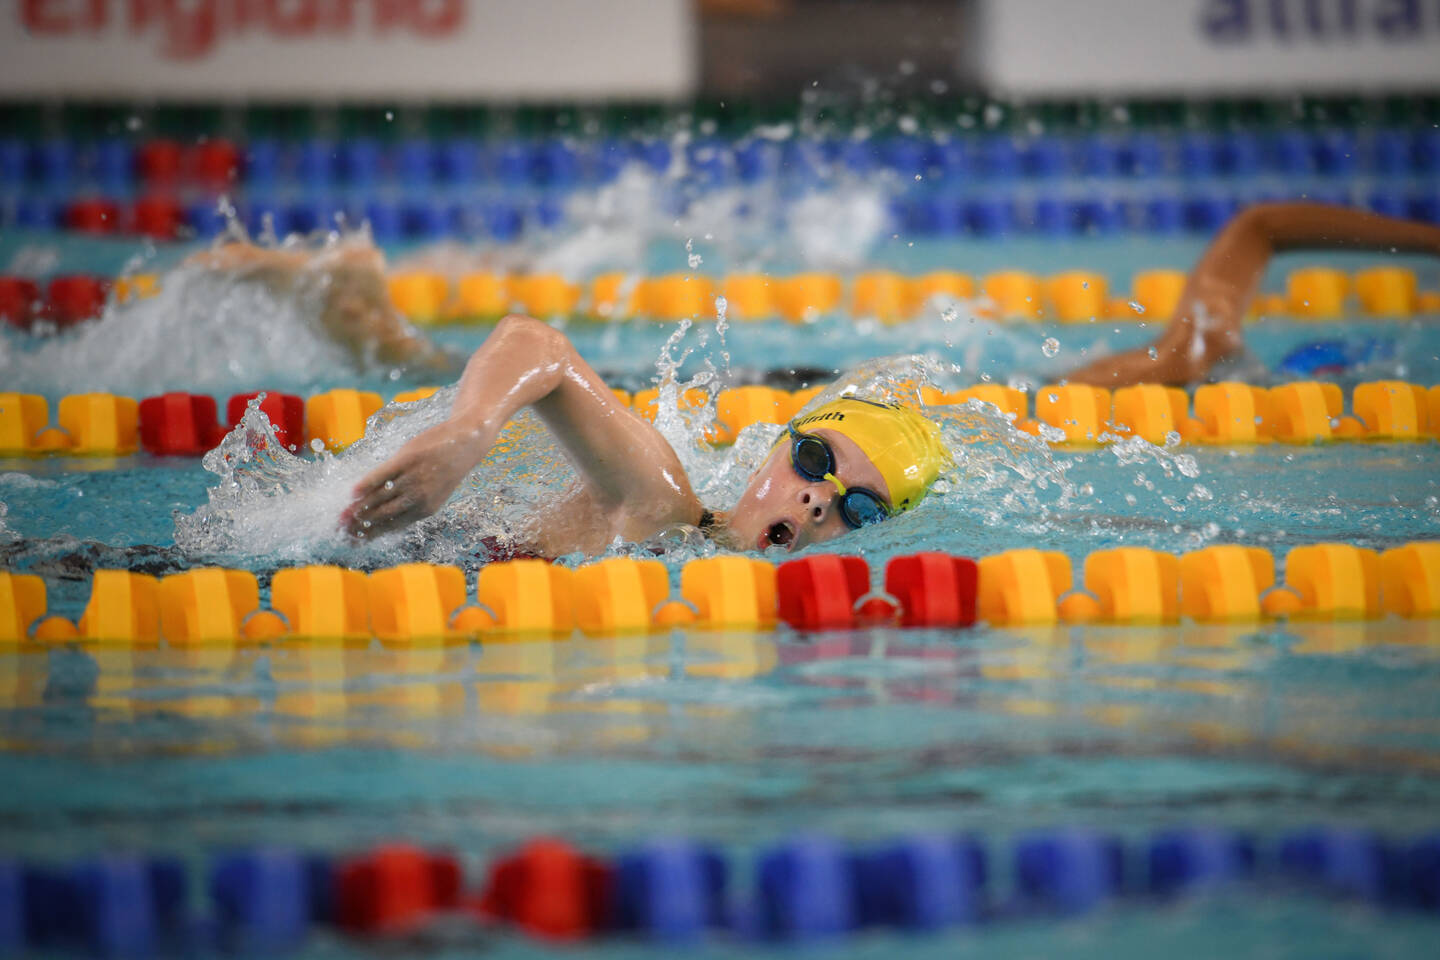 A swimmer in a yellow cap does front crawl down a swimming lane.